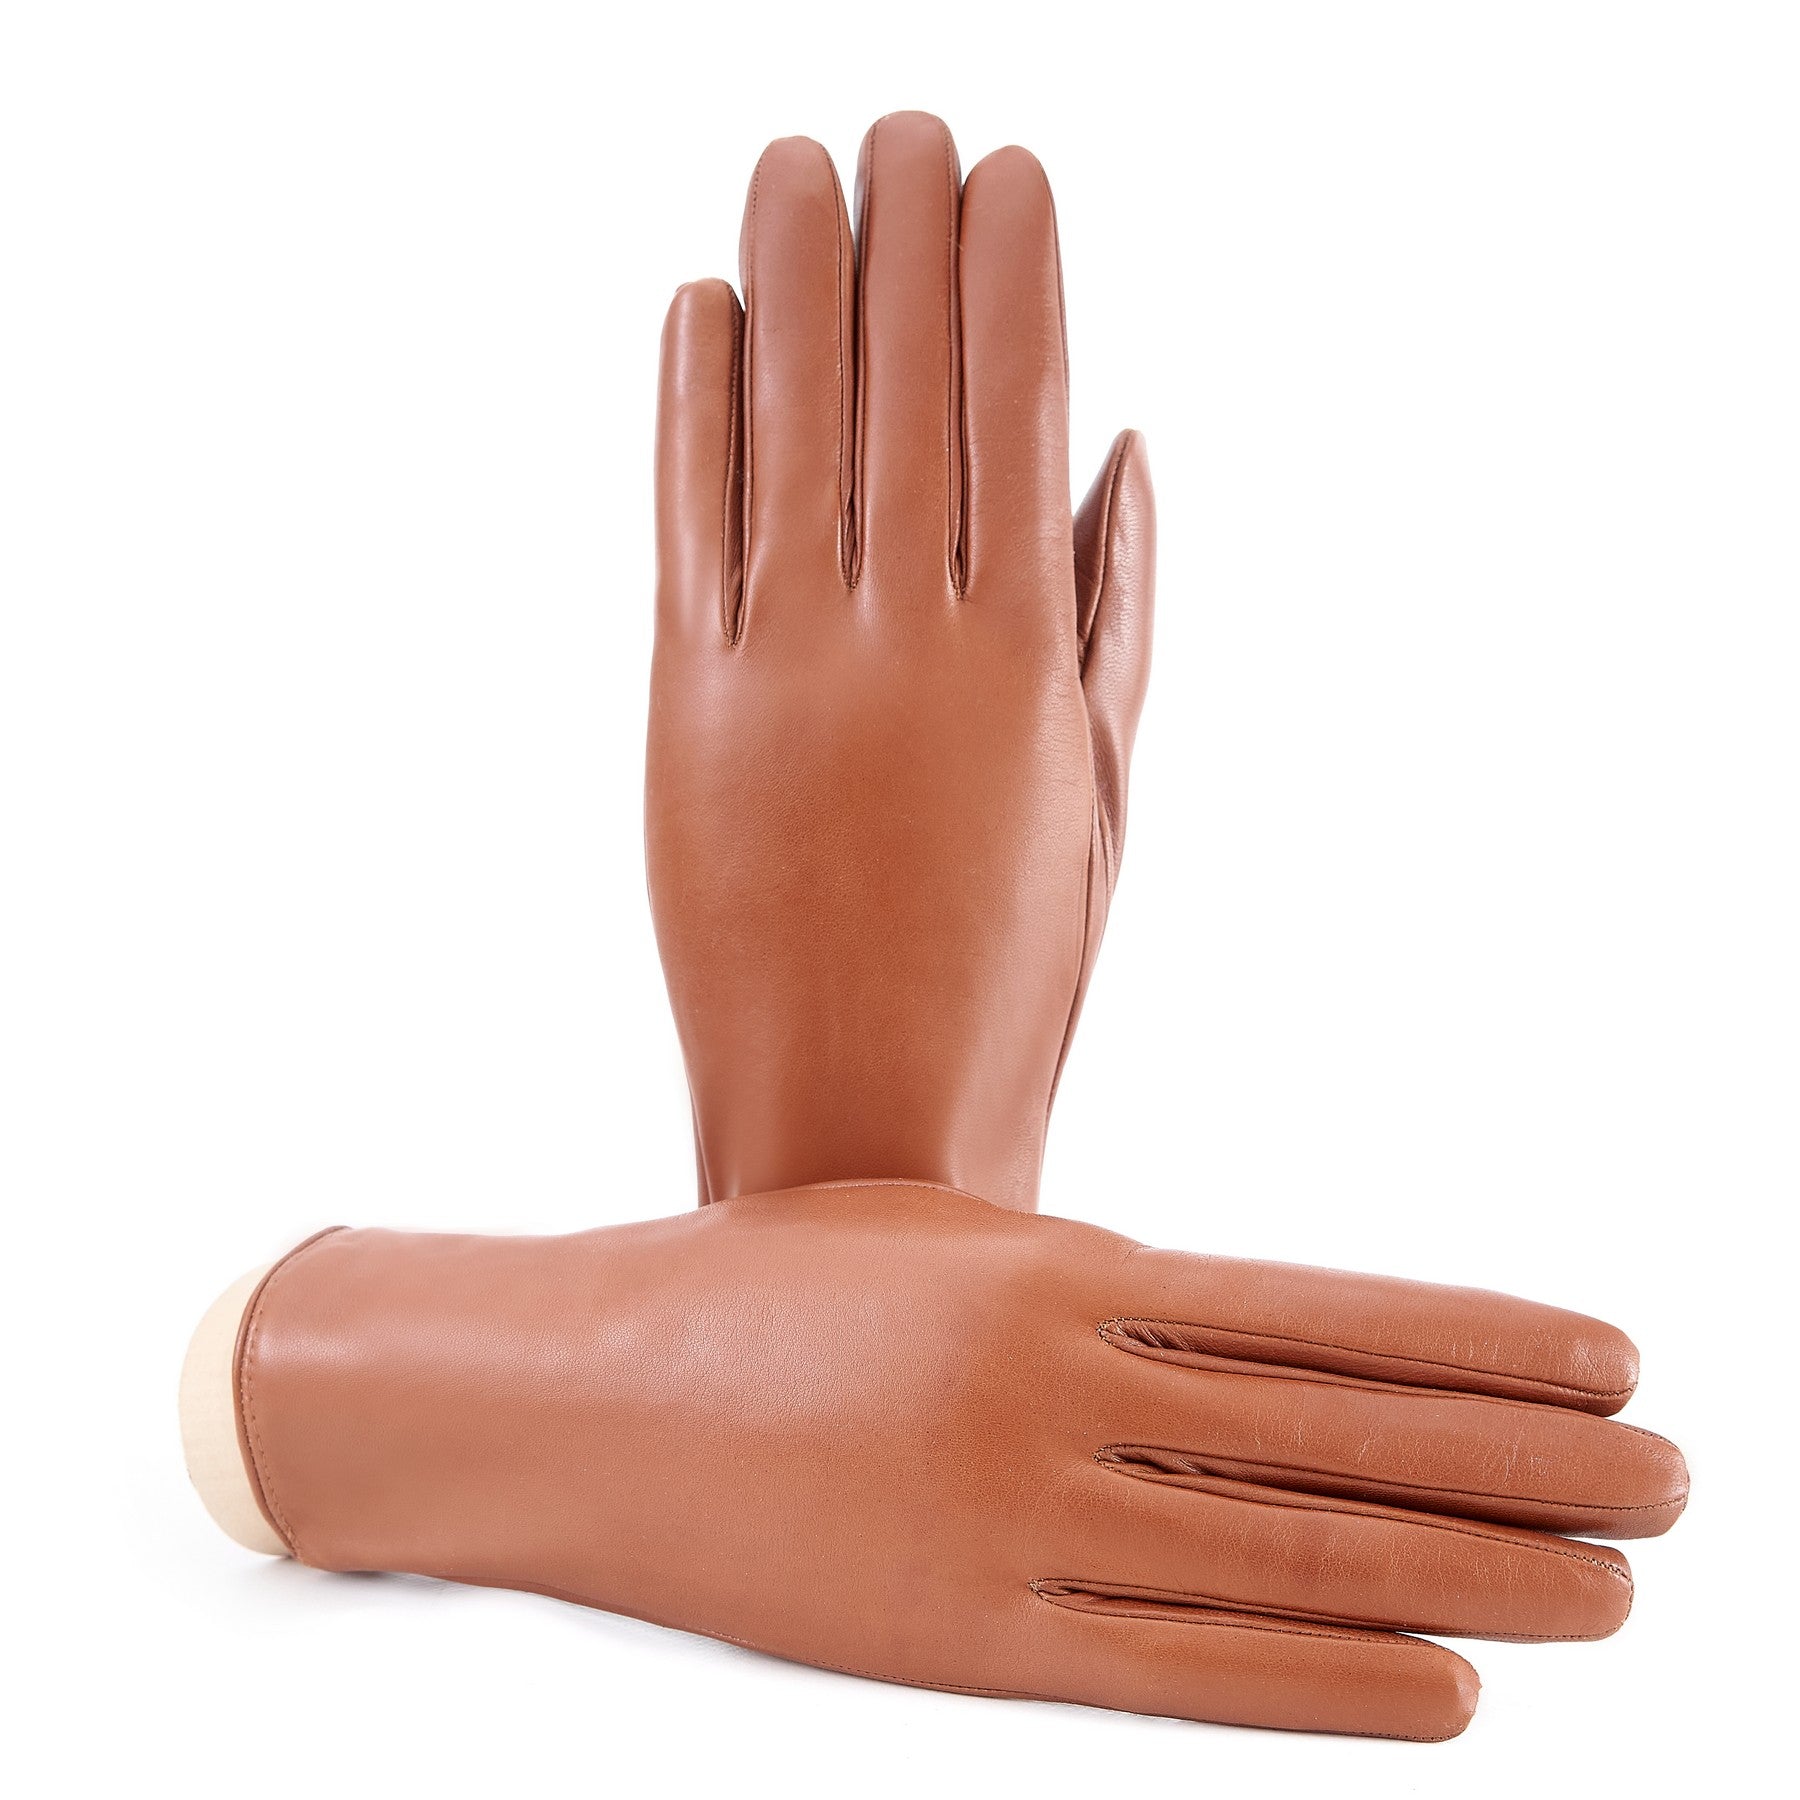 Women’s basic camel soft nappa leather gloves with palm opening and mix cashmere lining